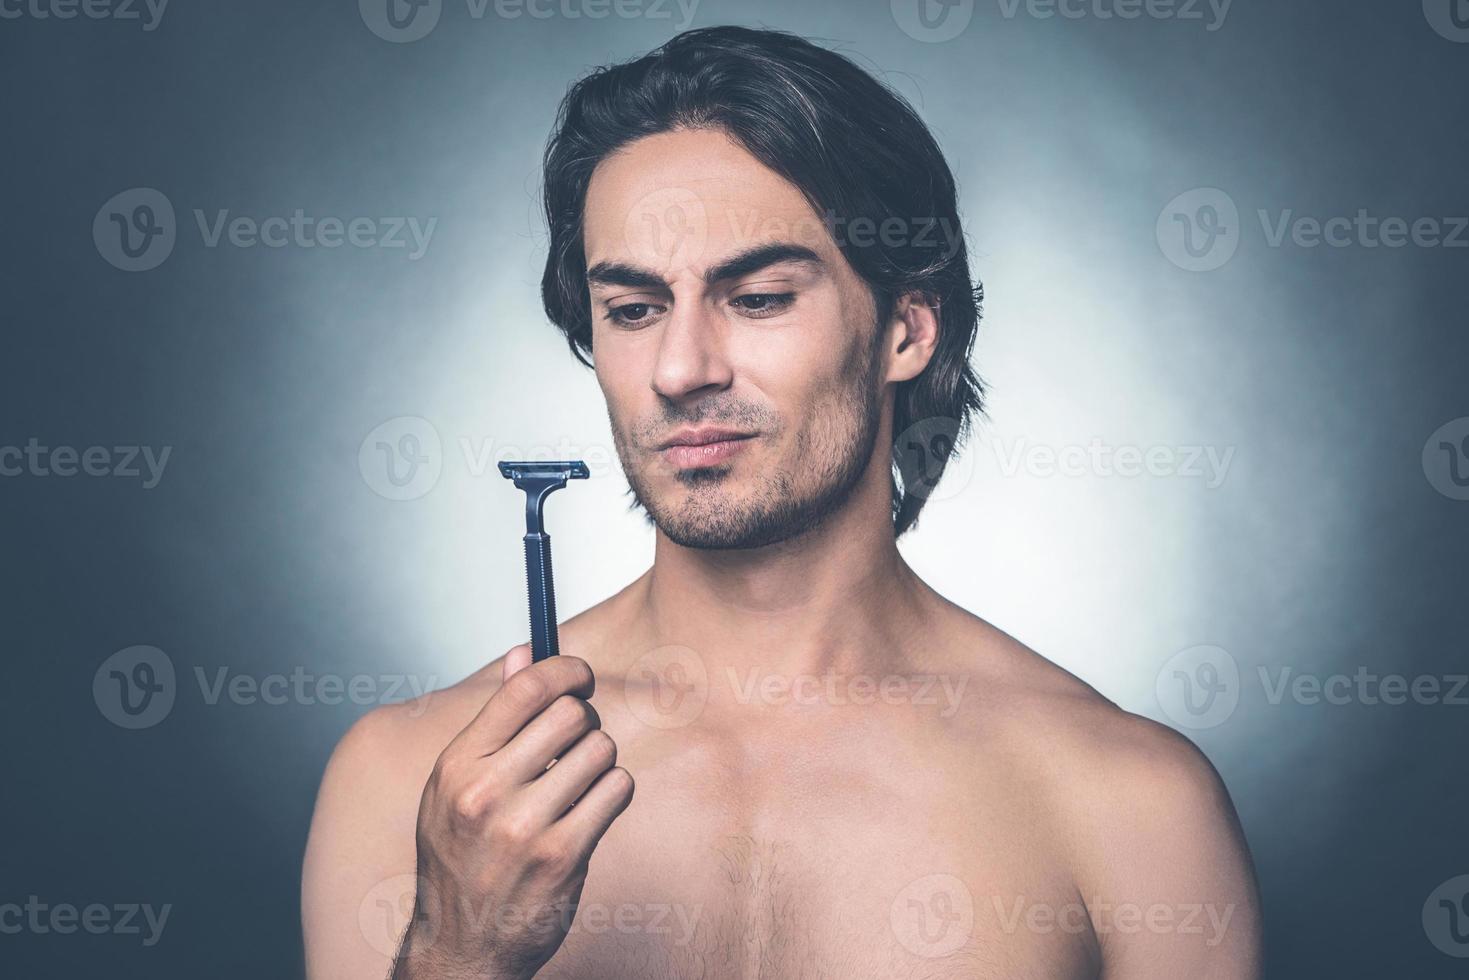 Really bad razor. Portrait of thoughtful young shirtless man looking at razor while standing against grey background photo